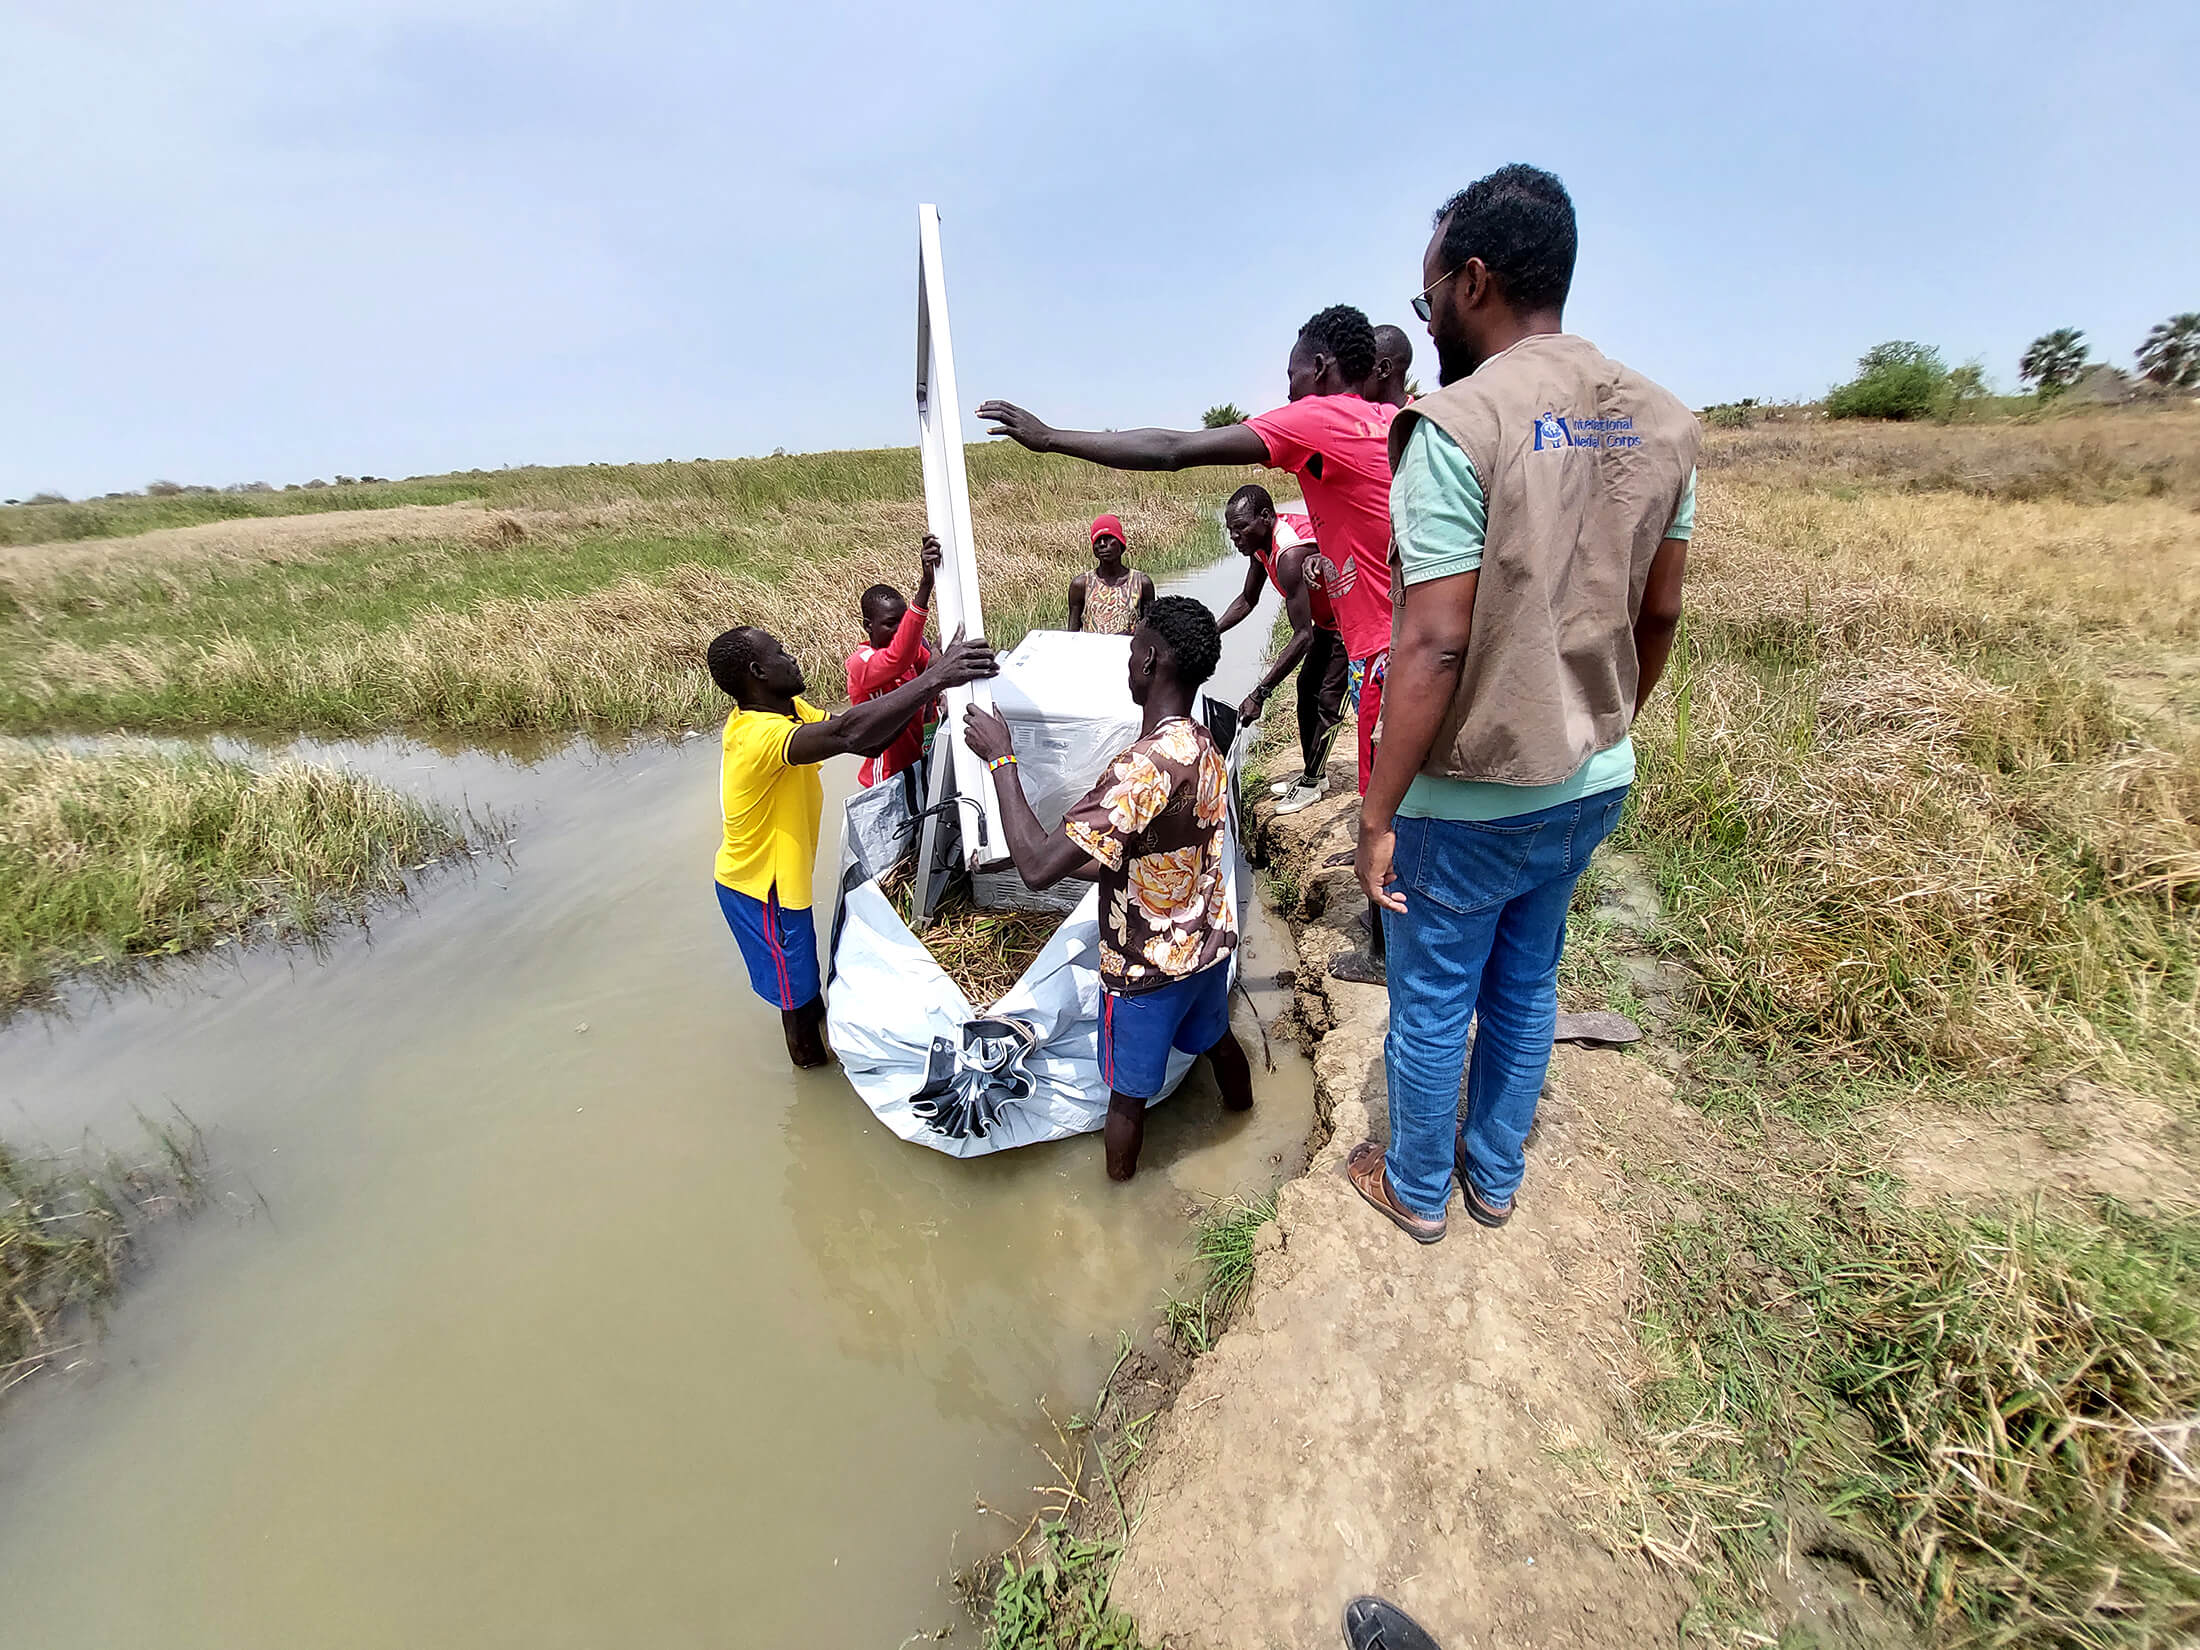 Ahmed-kheyr Moalim Mohamud helps a group of porters transport a vaccine refrigerator on an improvised canoe.